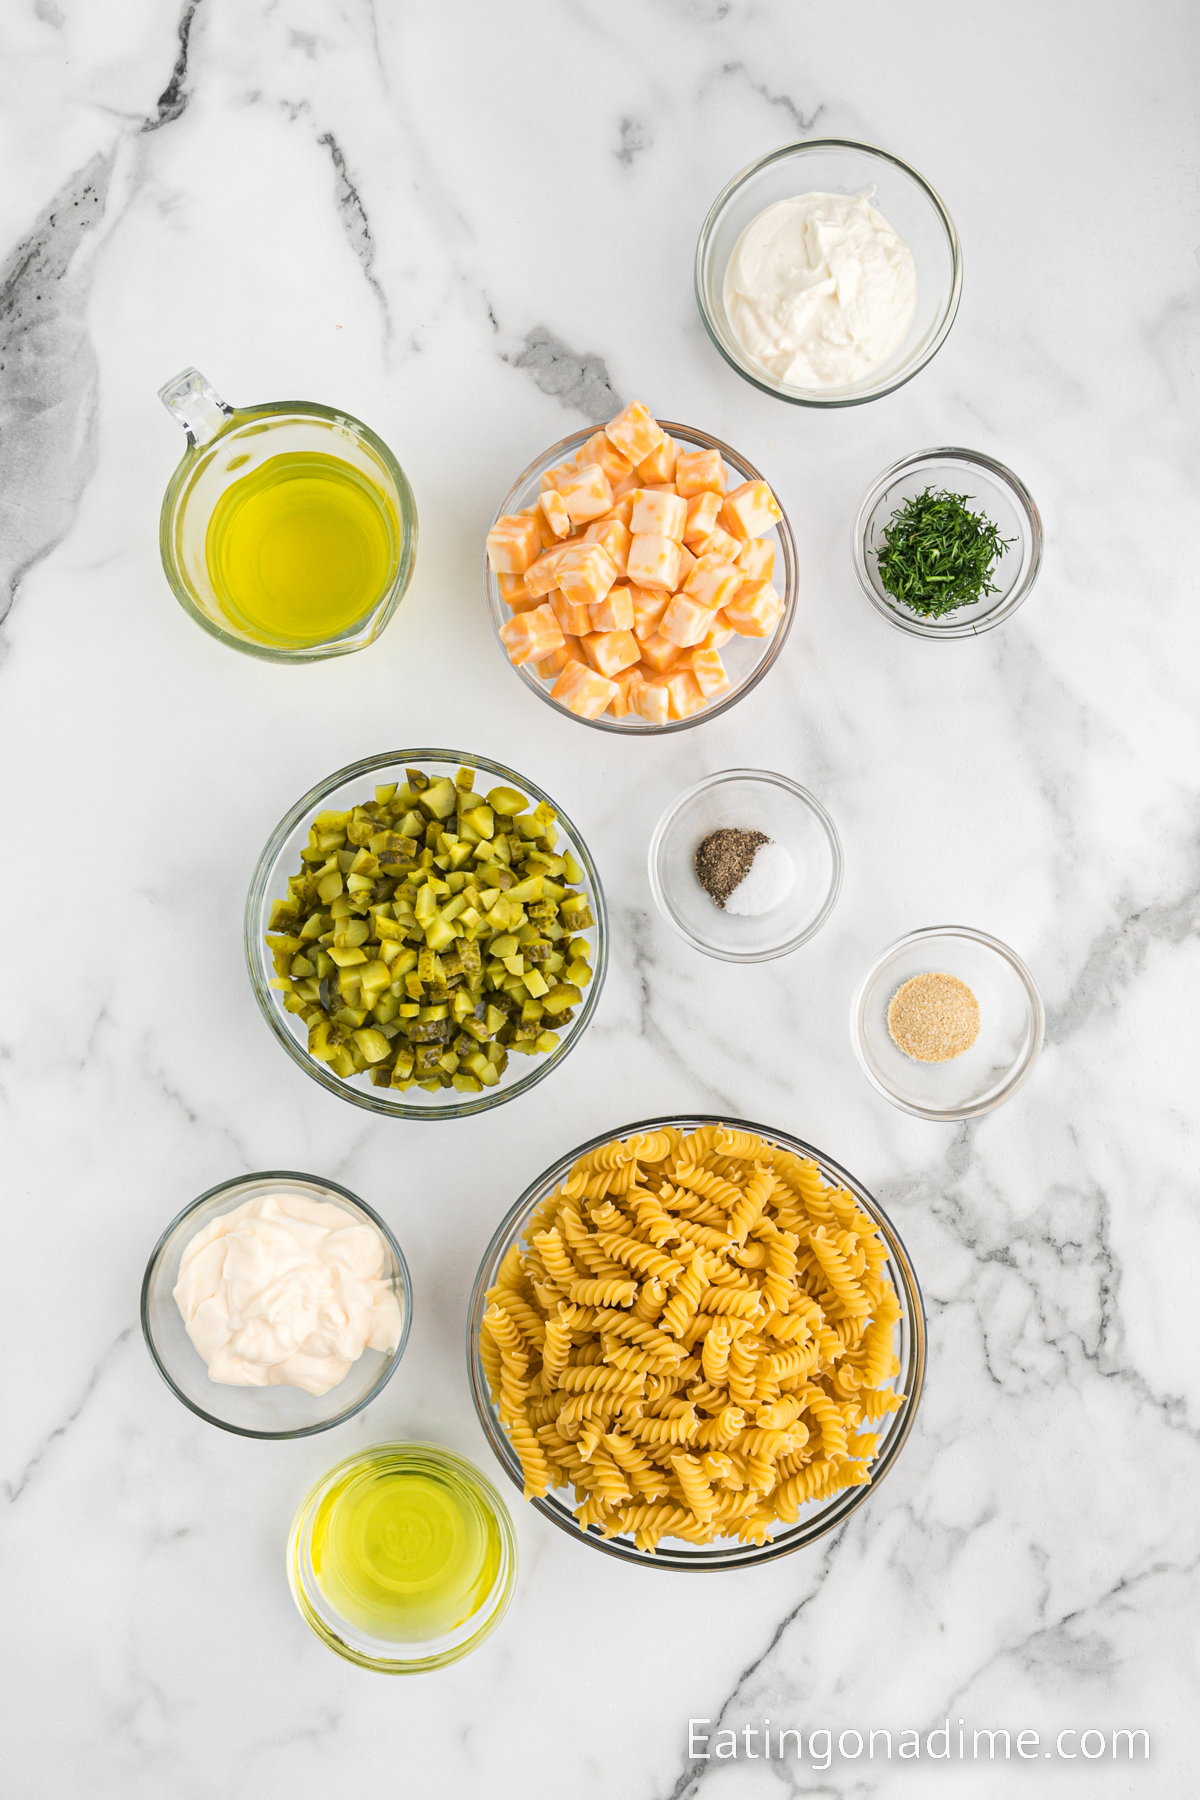 Ingredients needed - rotini pasta, dill pickle juice, baby dill pickles, cheese, mayonnaise, sour cream, dried dill, salt and pepper onion powder